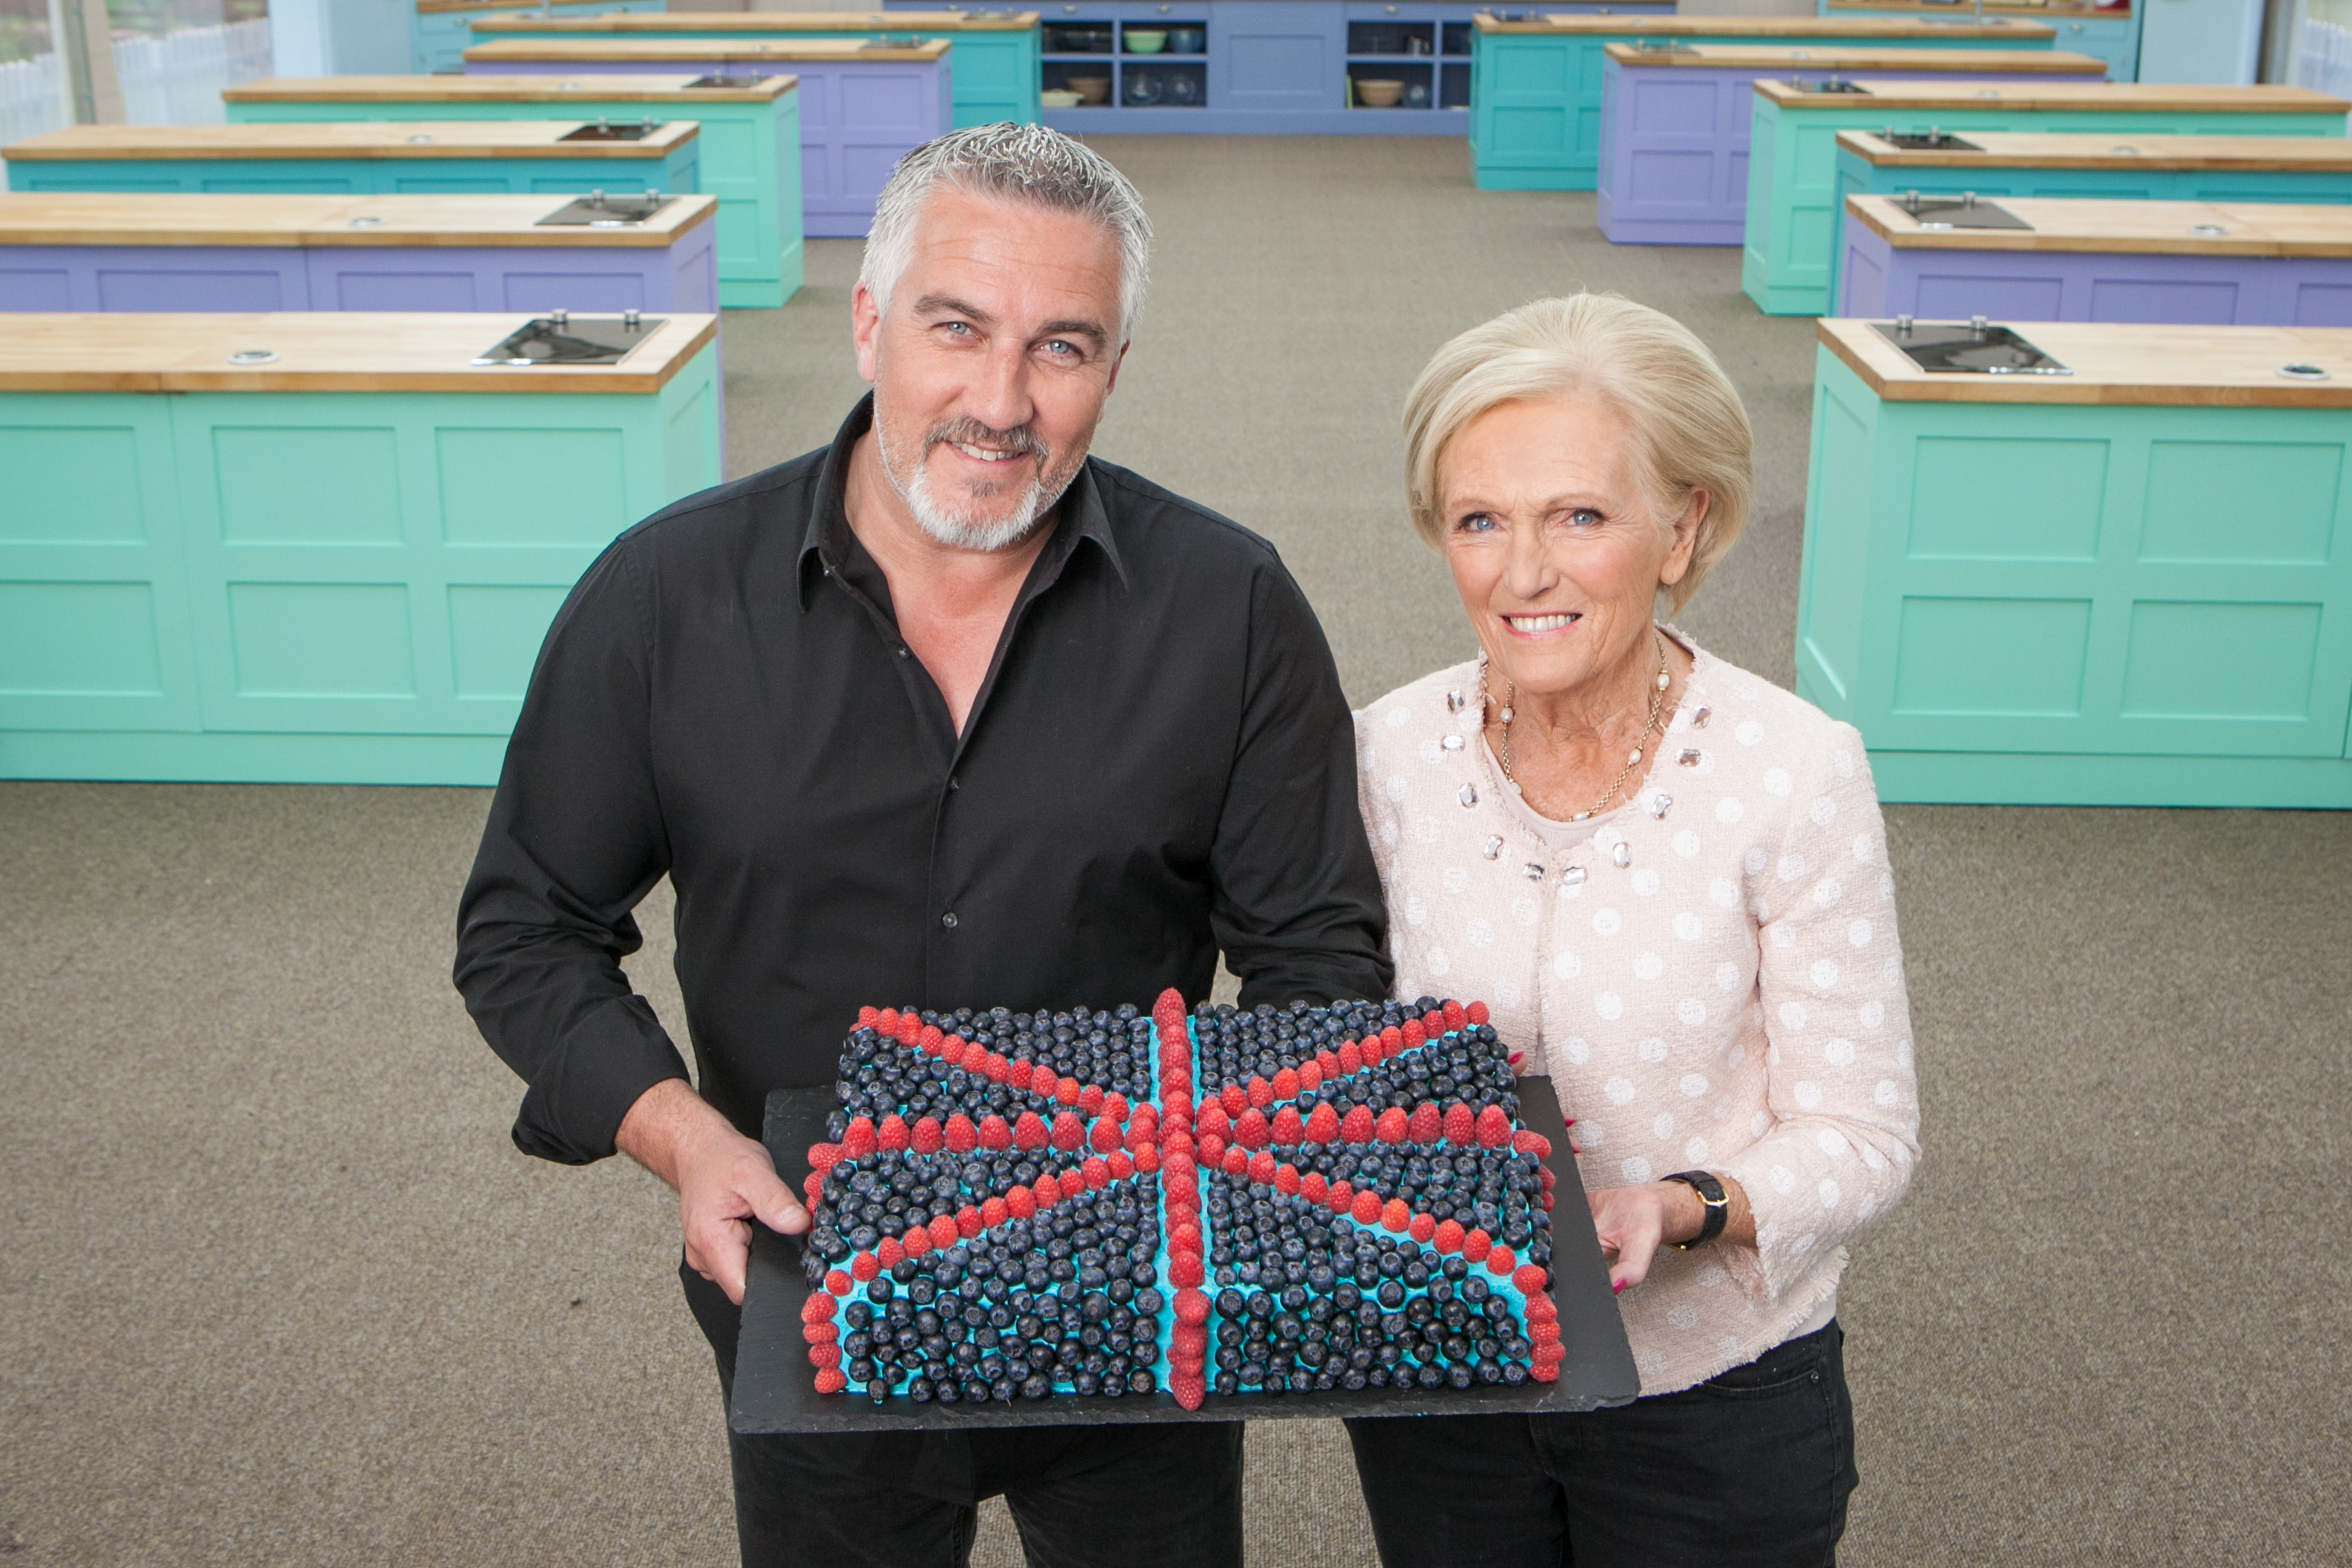 Paul con Mary Berry en The Great British Bake Off